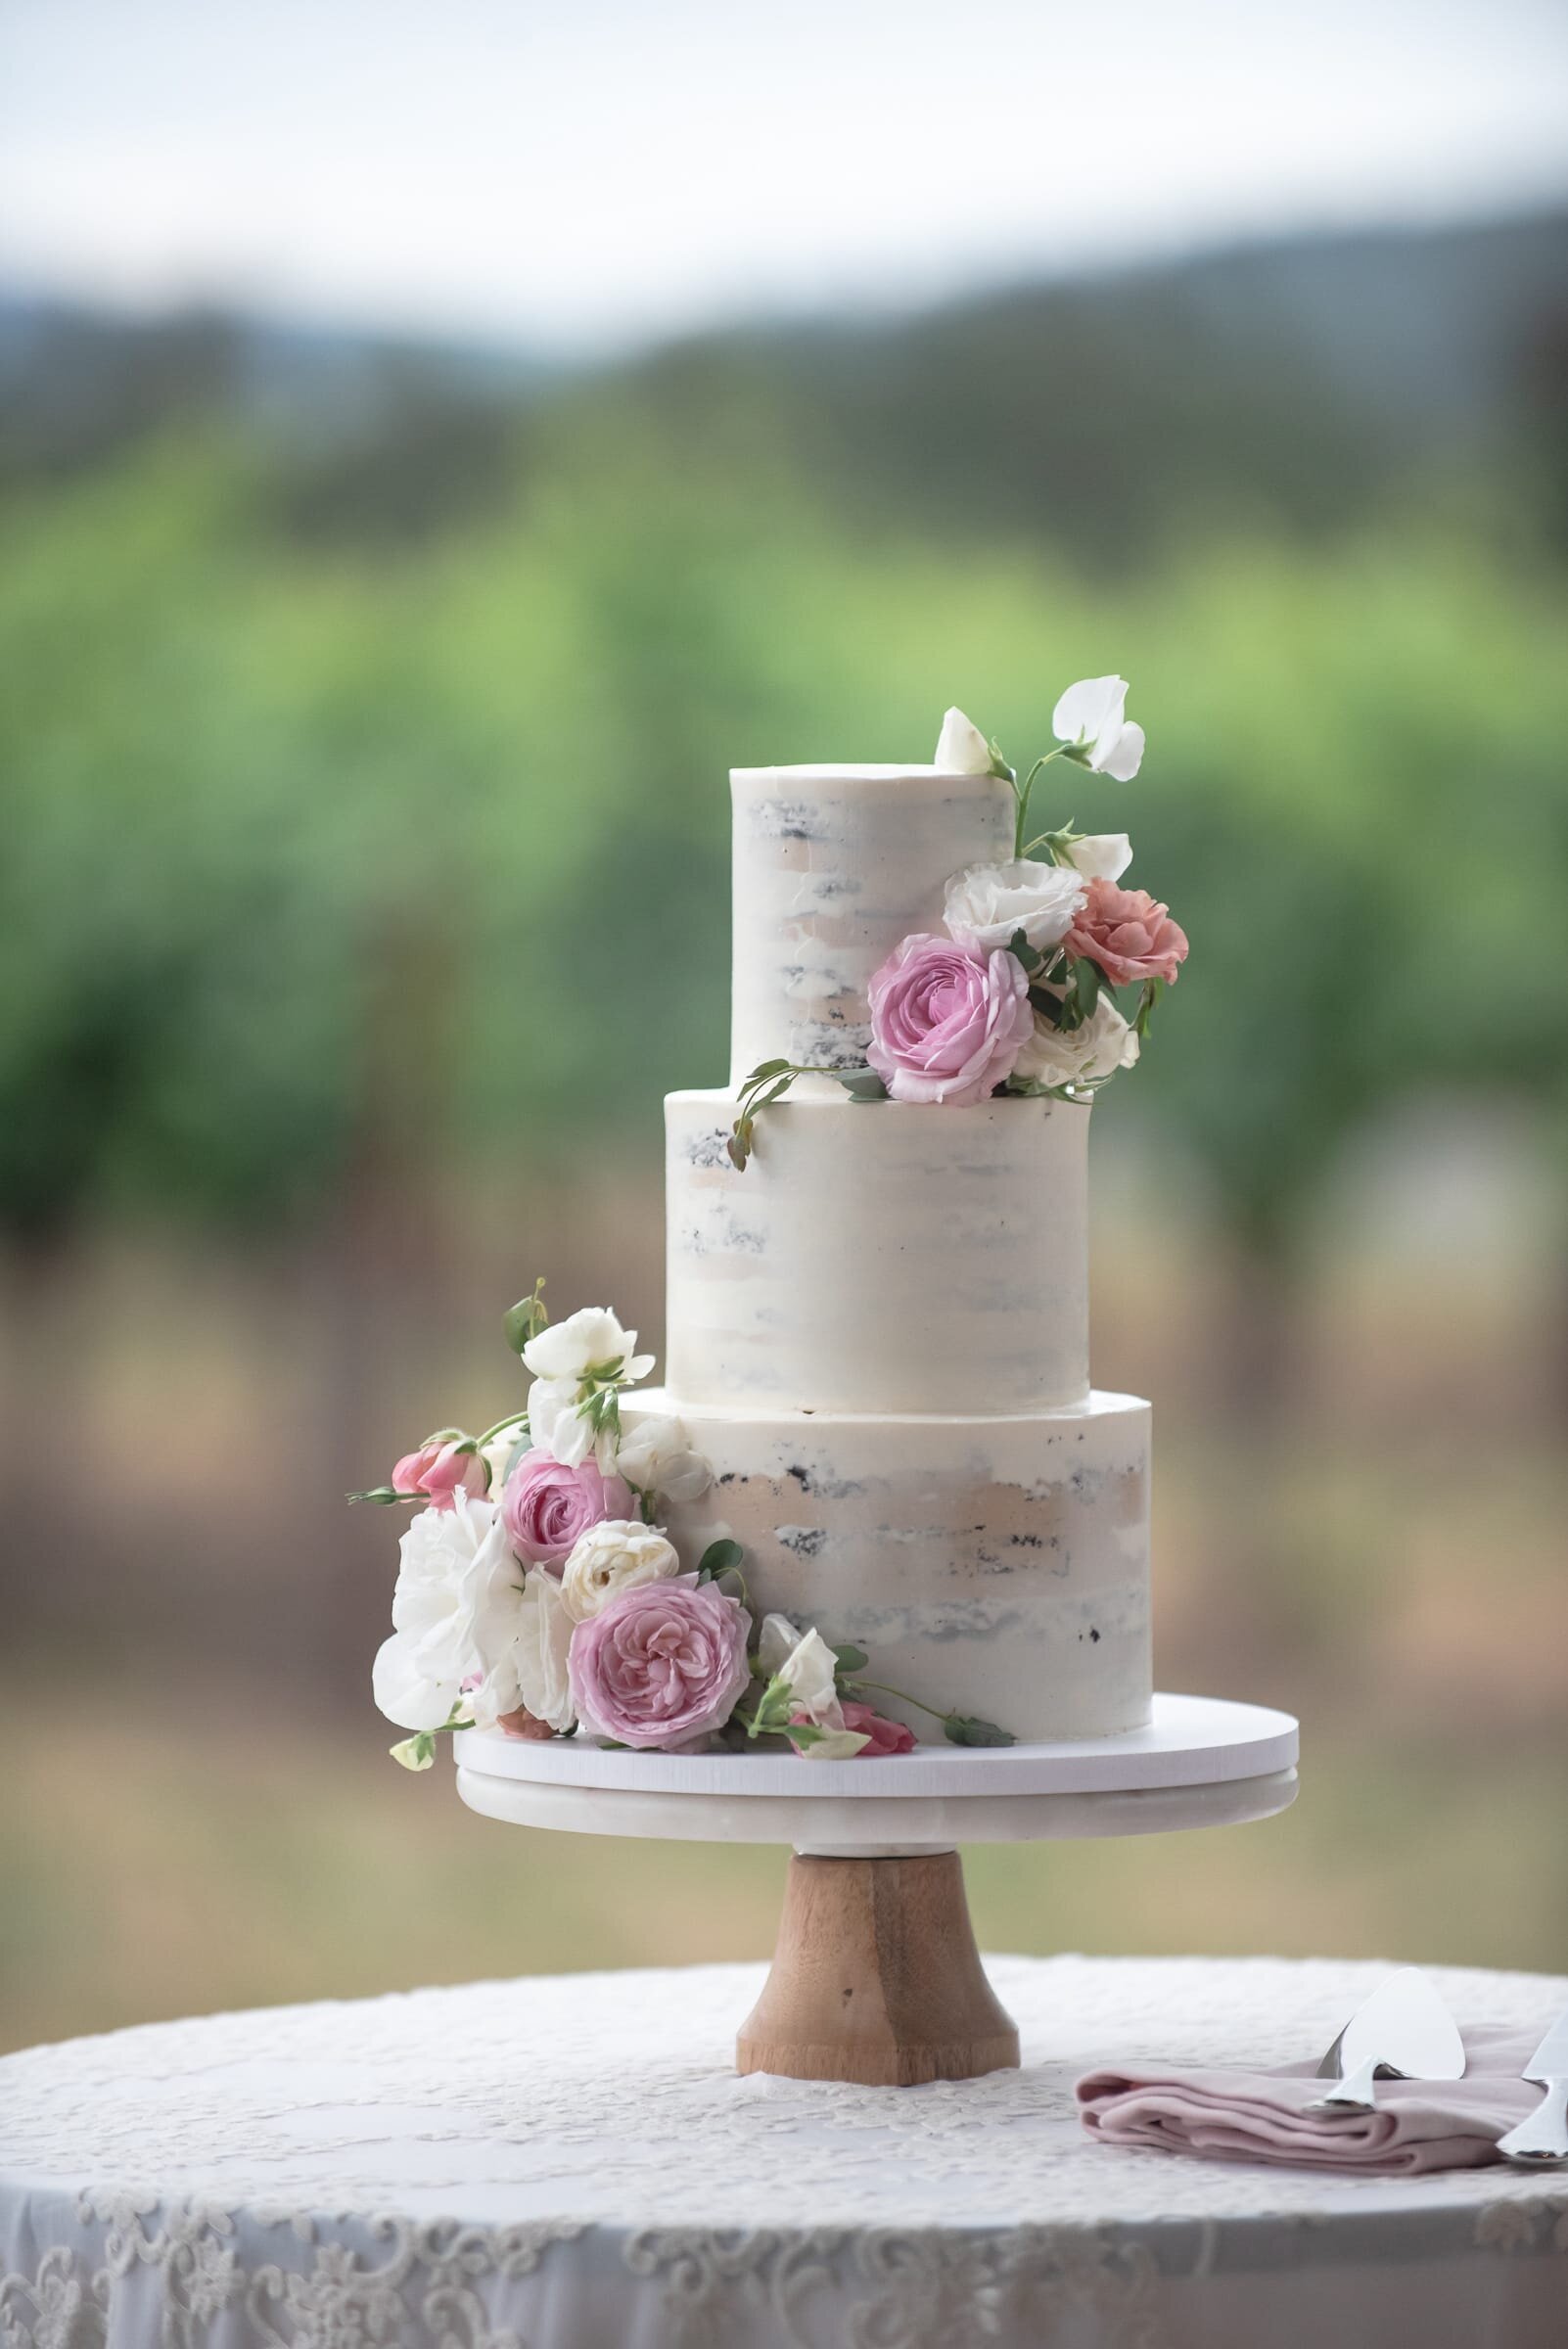 naked wedding cake with white and pink florals. Destination wedding photography.